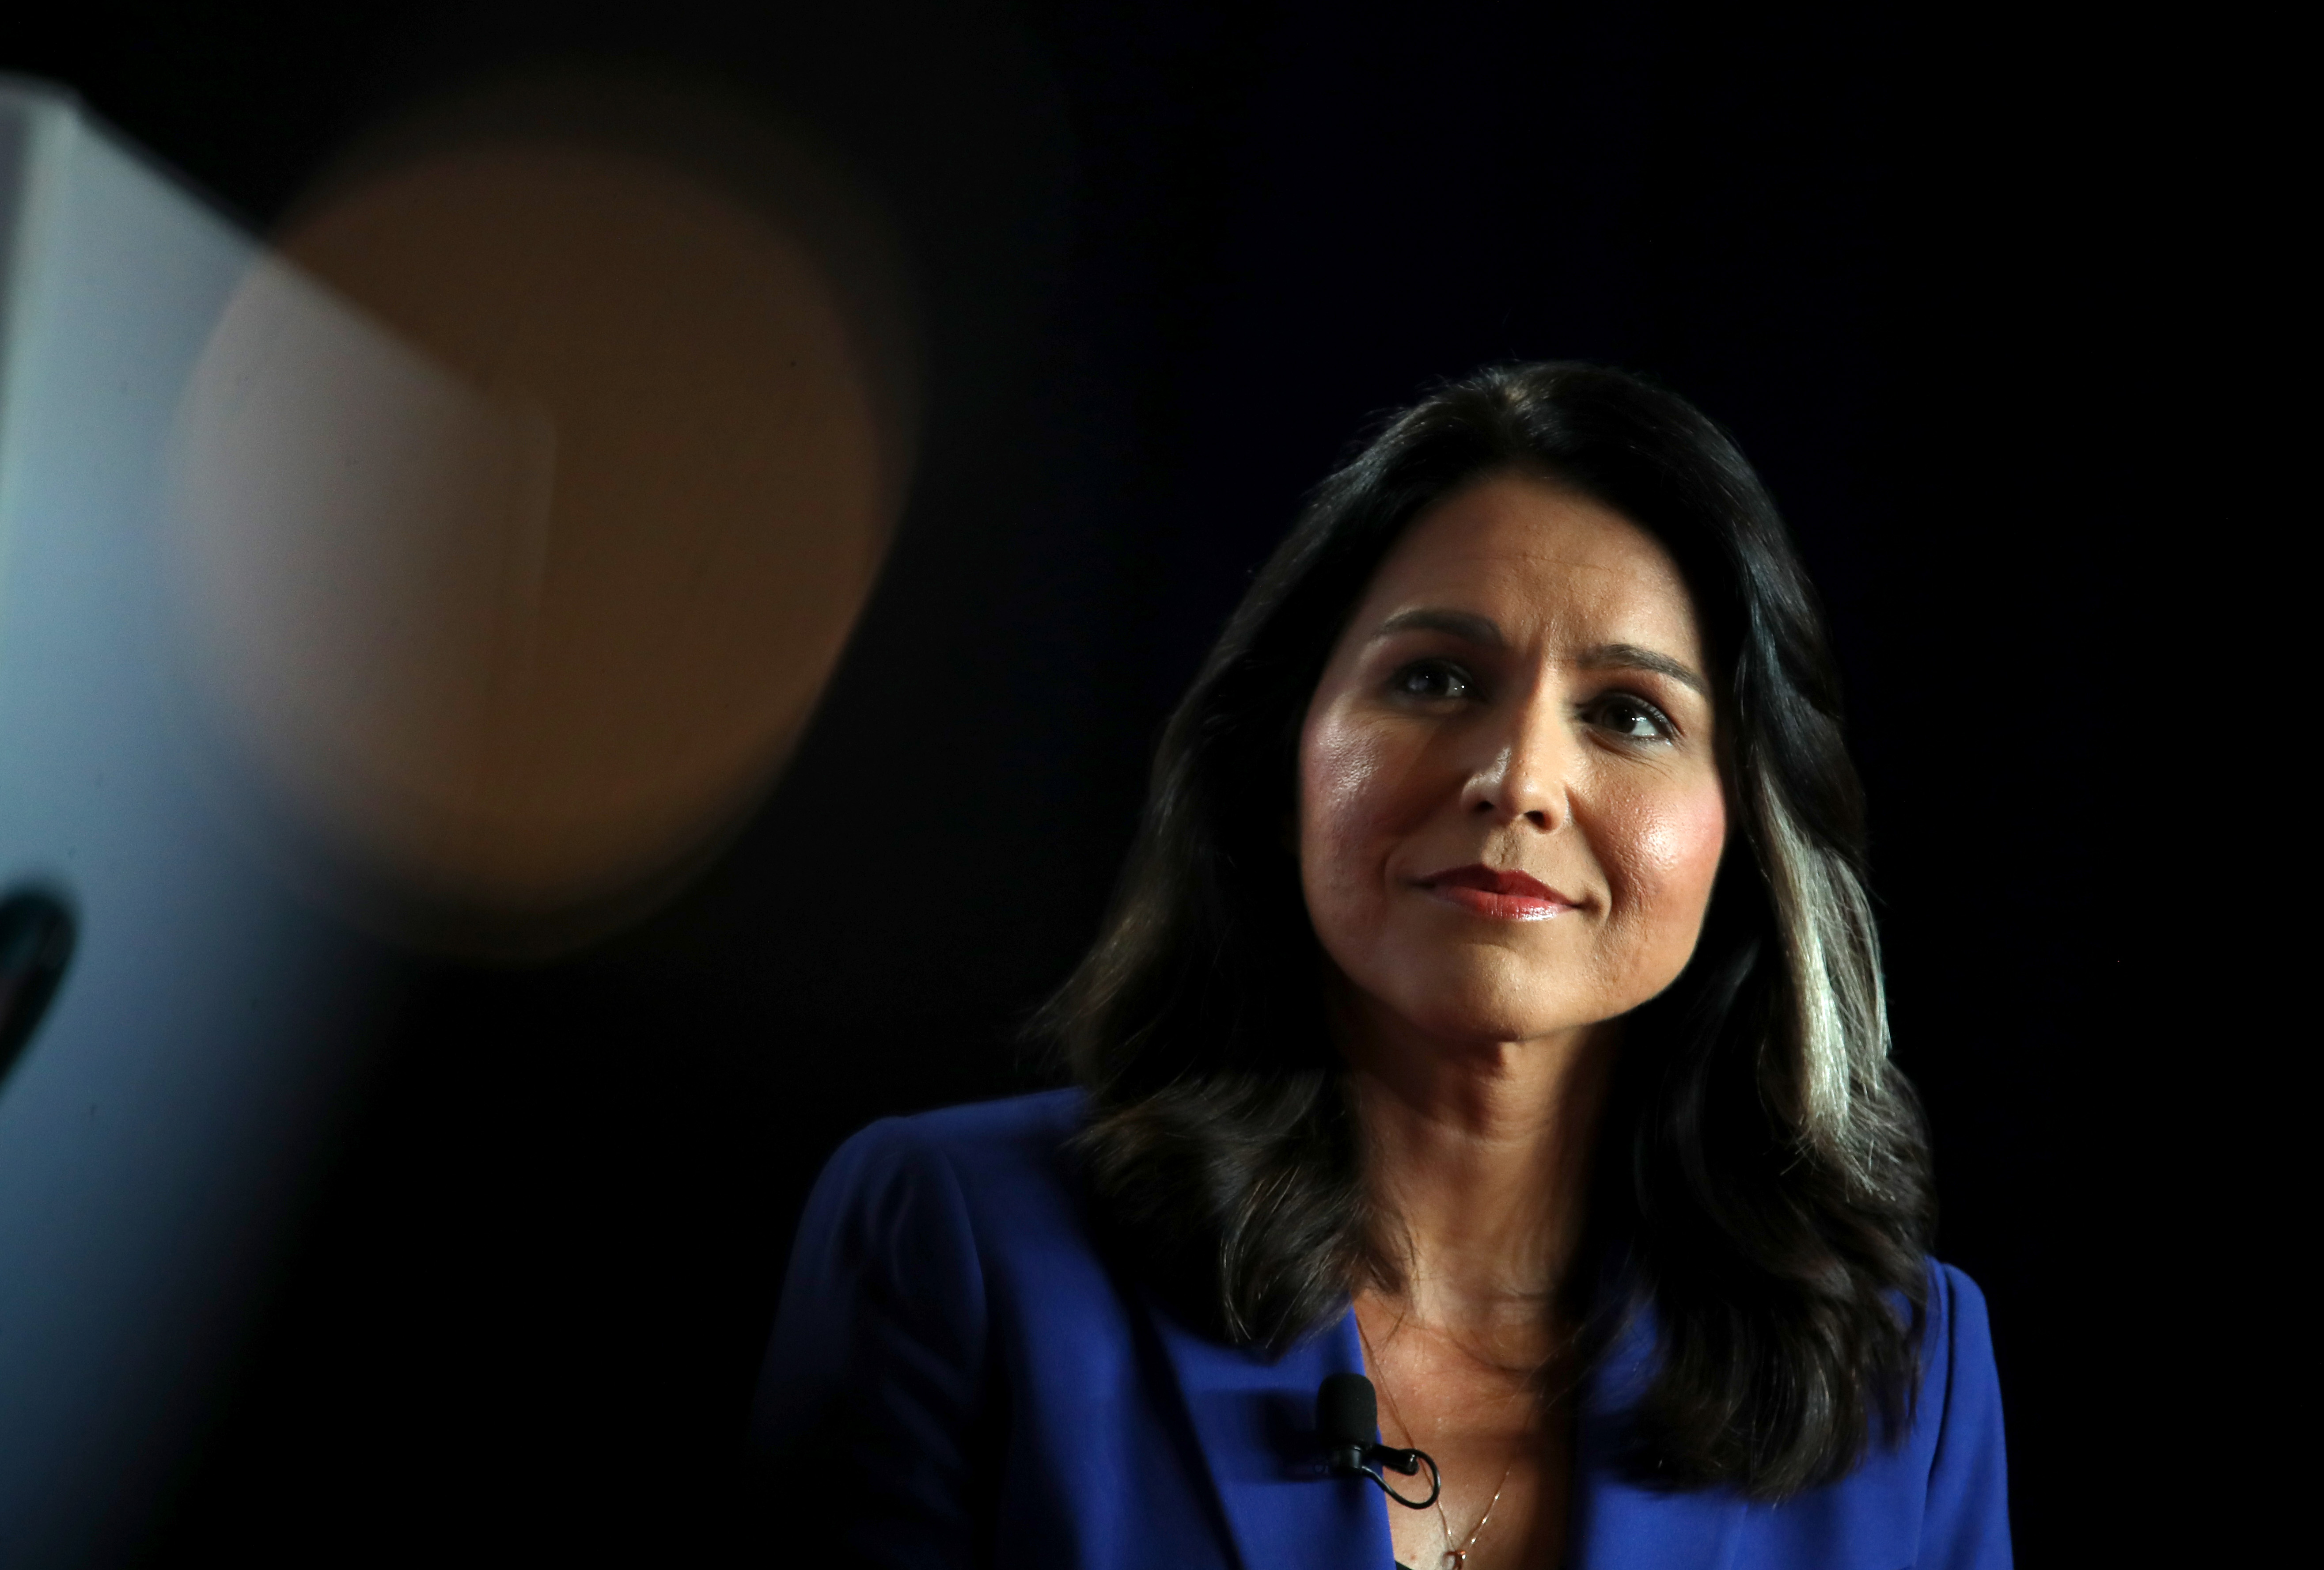 CEDAR RAPIDS, IOWA - JULY 17: Democratic presidential candidate U.S. Rep. Tulsi Gabbard (D-HI) speaks during the AARP and The Des Moines Register Iowa Presidential Candidate Forum on July 17, 2019 in Cedar Rapids, Iowa. Twenty democratic presidential hopefuls are participating in the AARP and Des Moines Register candidate forums that will feature four candidates per forum that are being to be held in cities across Iowa over five days. (Photo by Justin Sullivan/Getty Images)